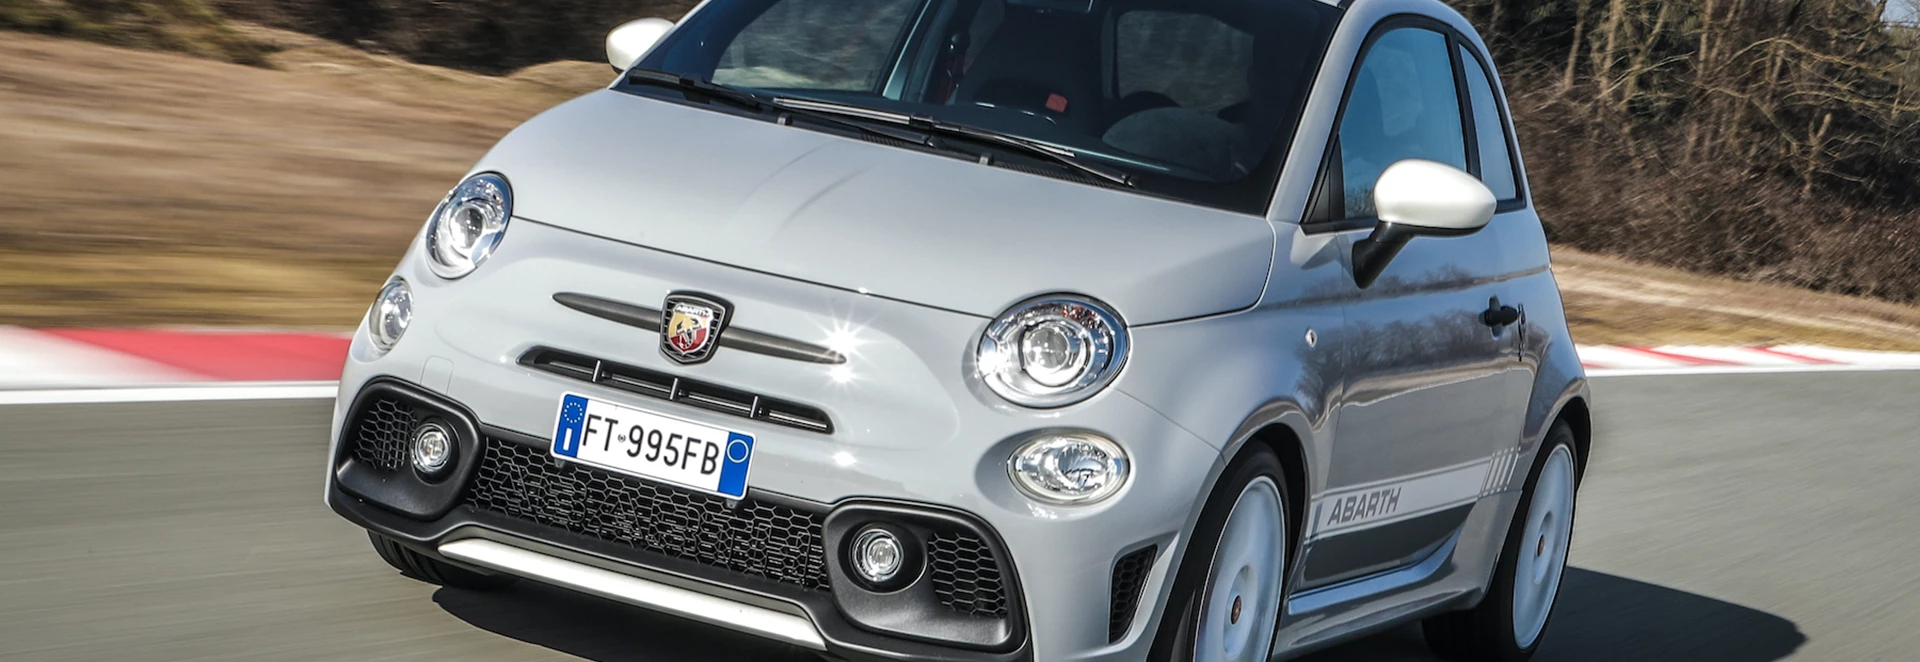 5 performance highlights of the Abarth 595 